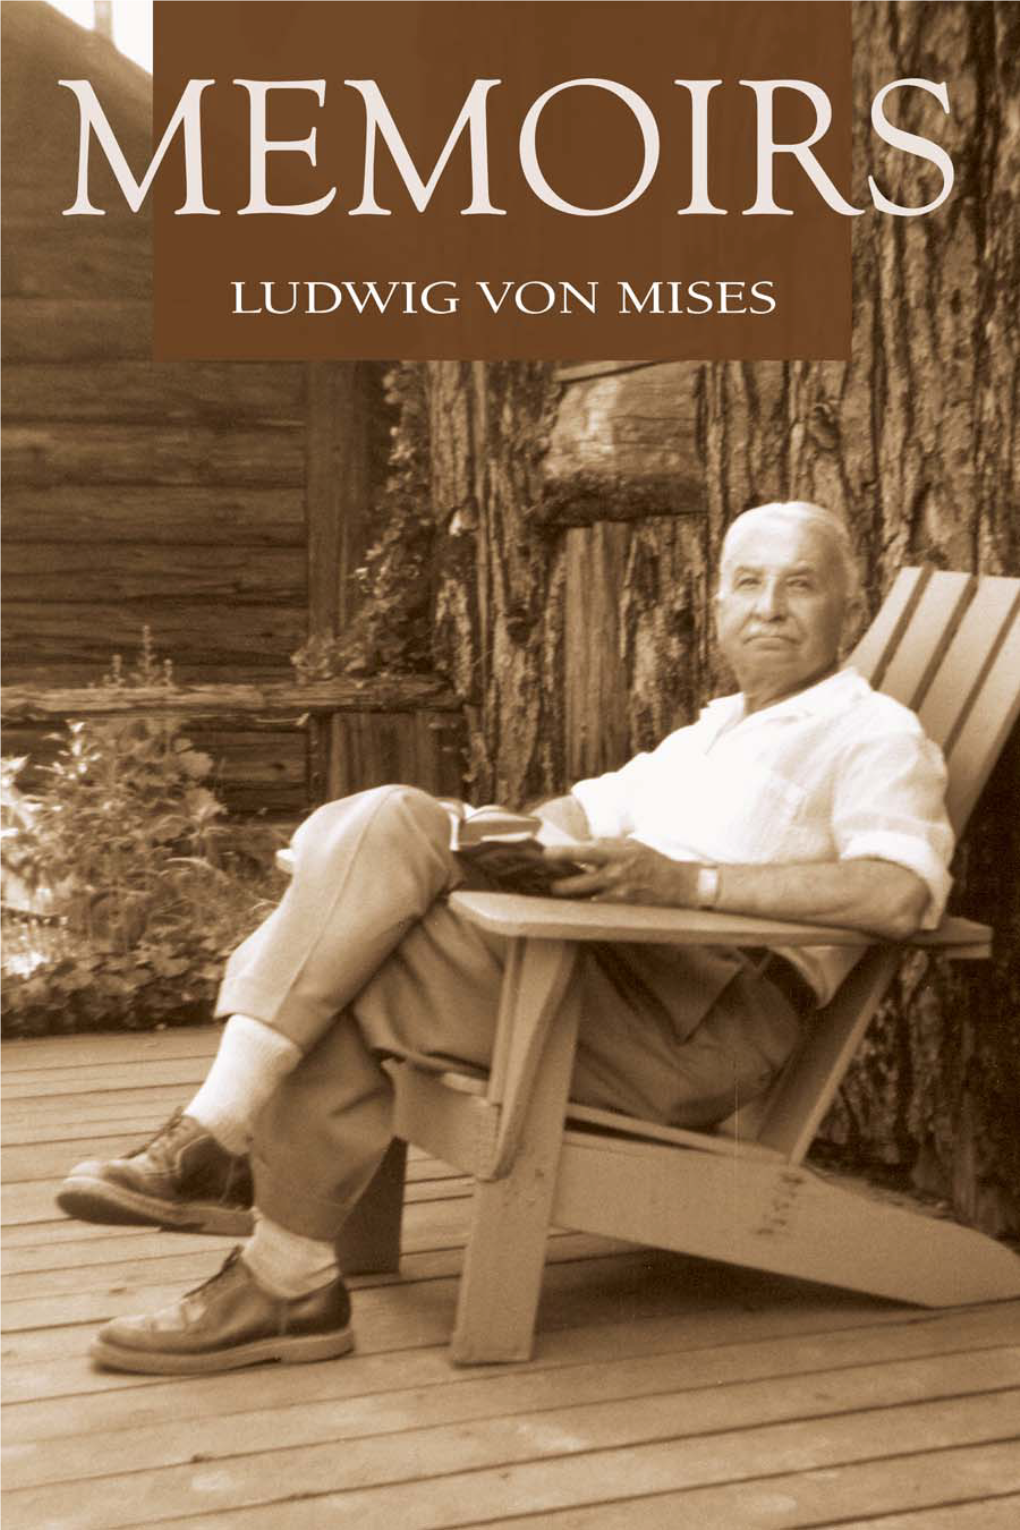 MEMOIRS the Ludwig Von Mises Institute Dedicates This Volume to All of Its Generous Donors and Wishes to Thank These Patrons, in Particular